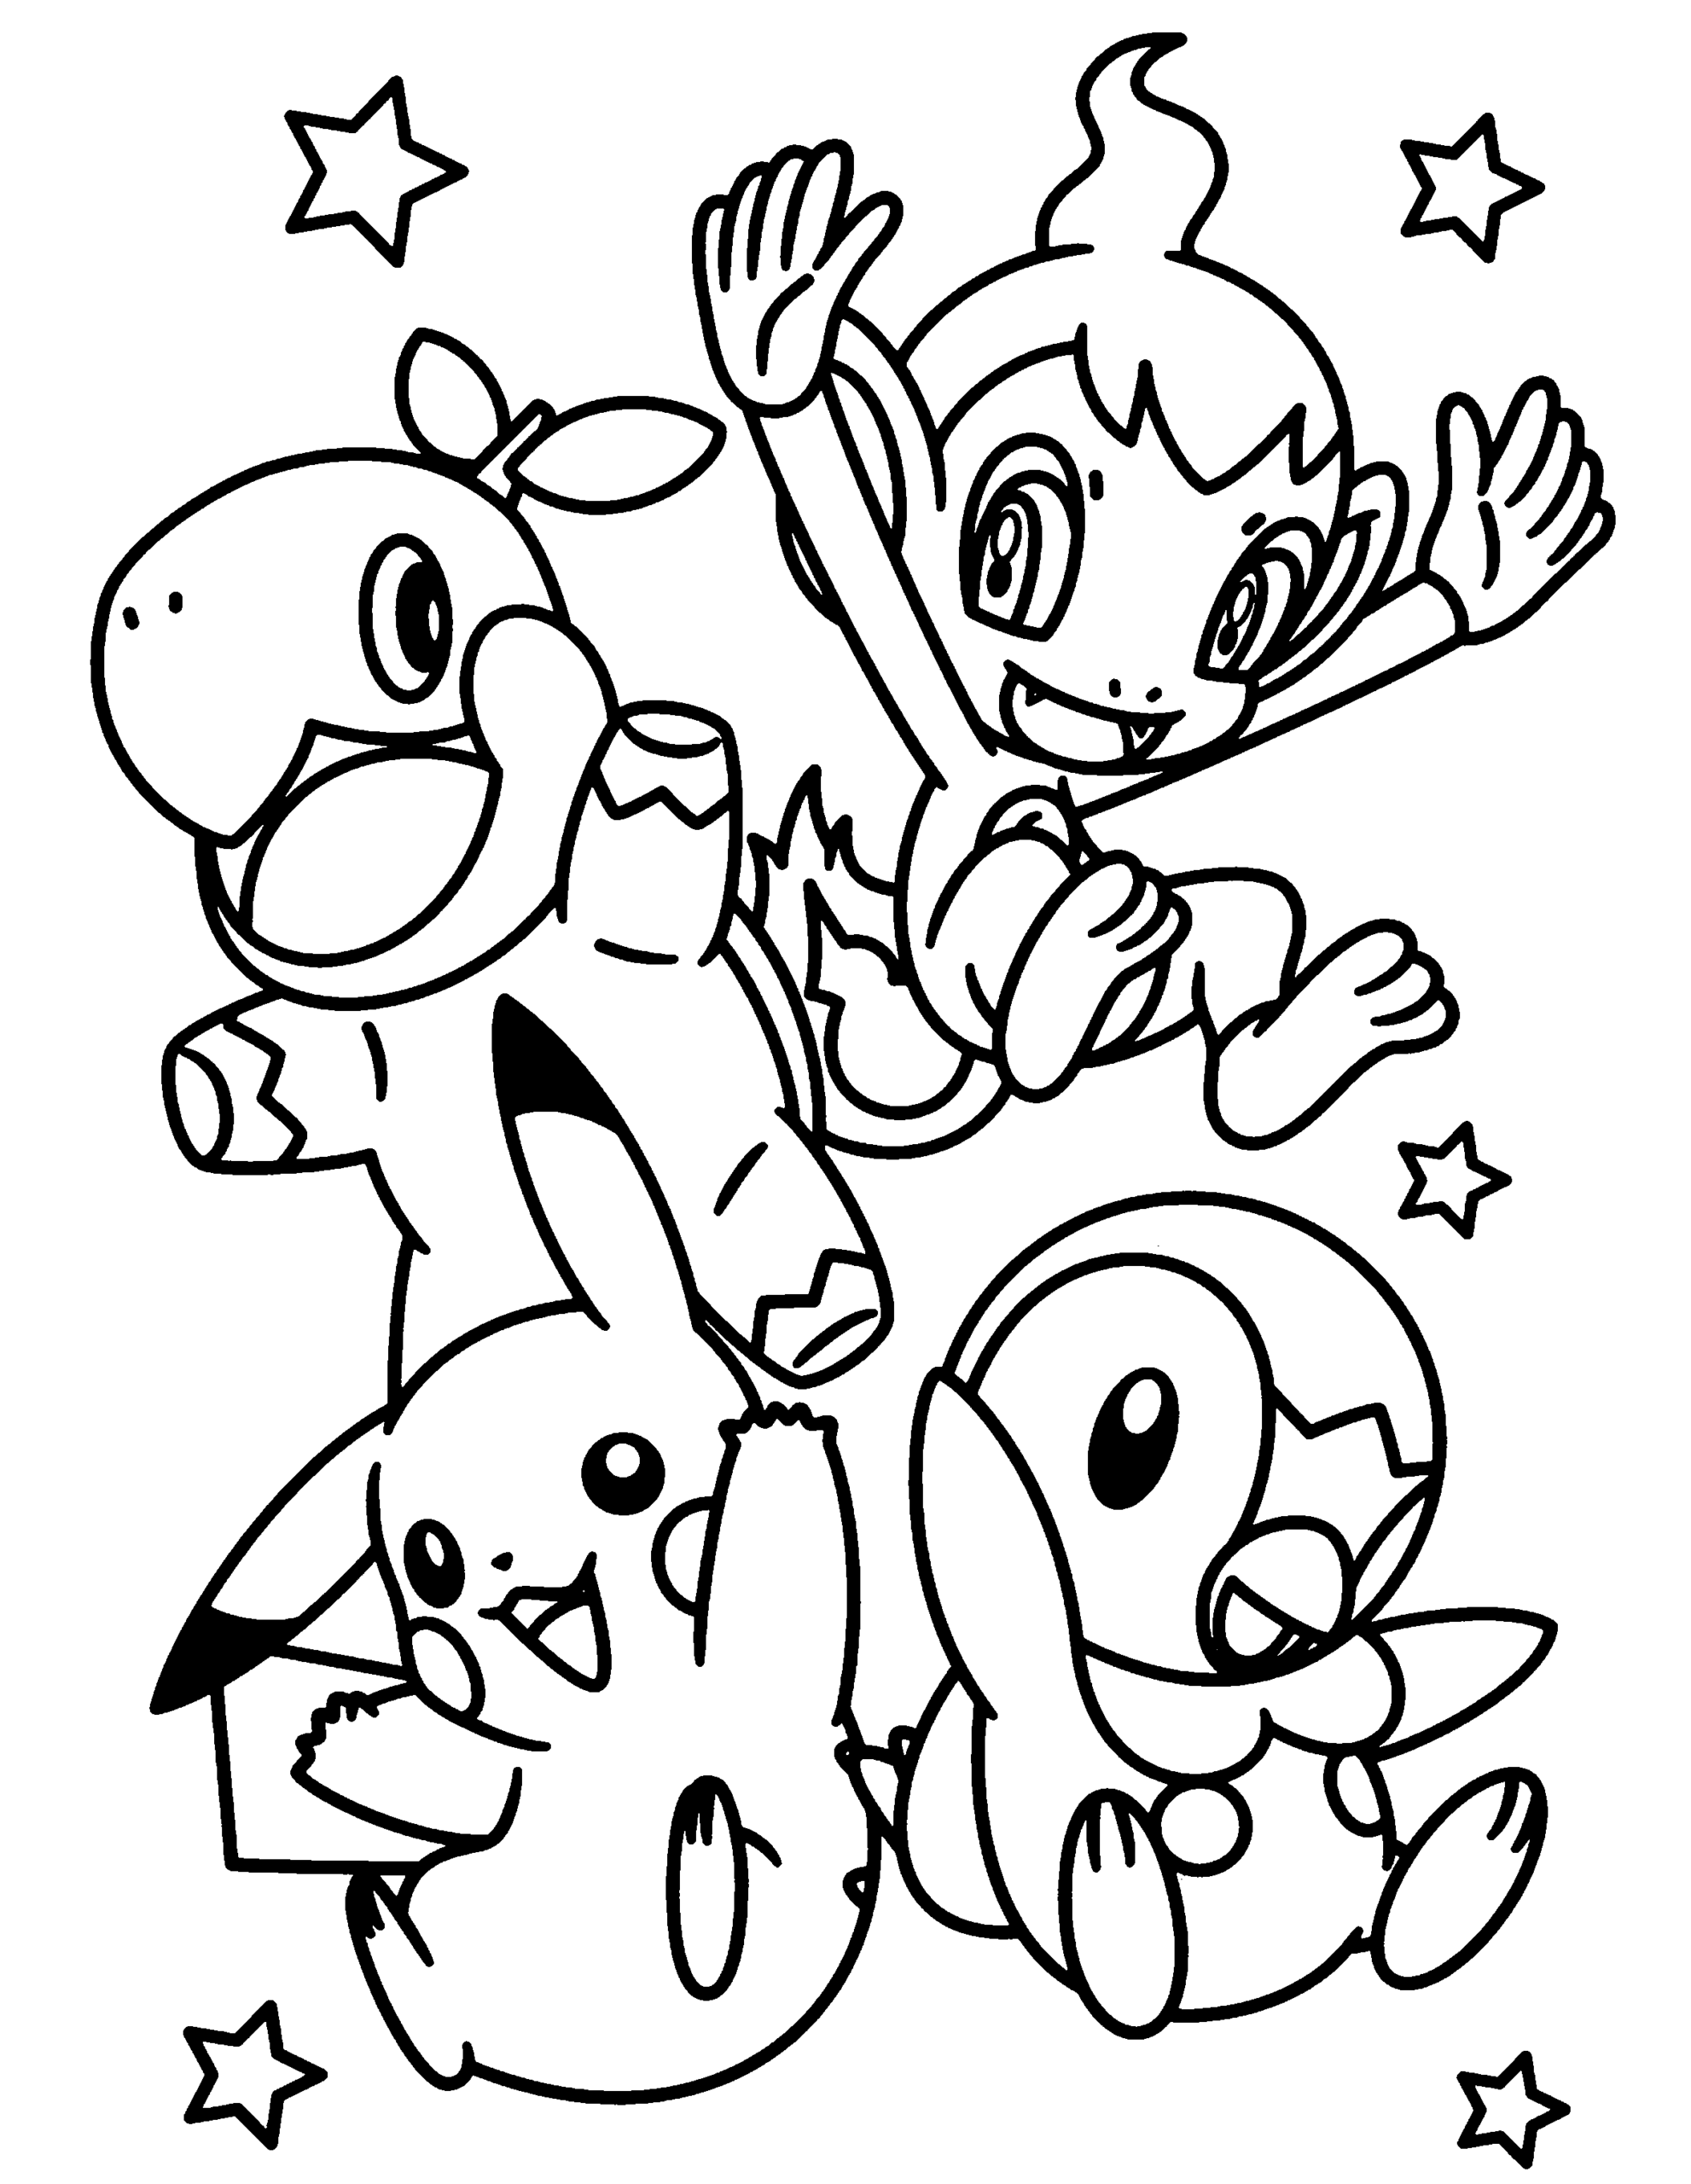 Pokemon Diamond and Pearl Coloring Pages Games Printable 2021 0901 Coloring4free